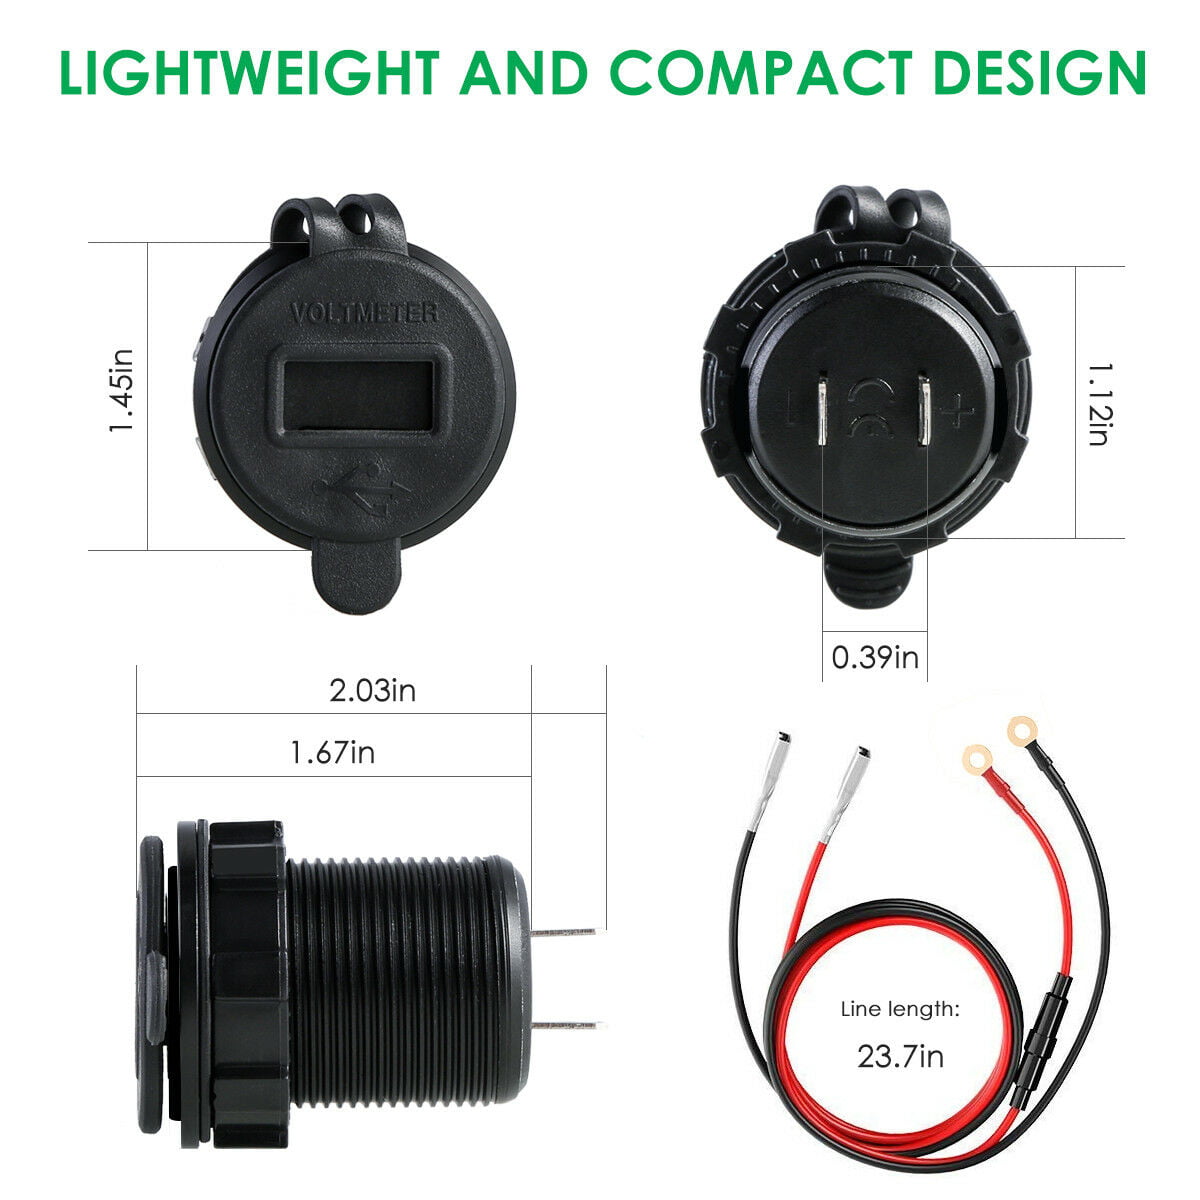 Waterproof Dual USB Charger Socket Power Outlet 2.1A & 2.1A with LED Voltmeter & Wire in-line 10A Fuse for 12-24V Car Boat Marine Motorcycle Black w/PC Plastic 4.2A 